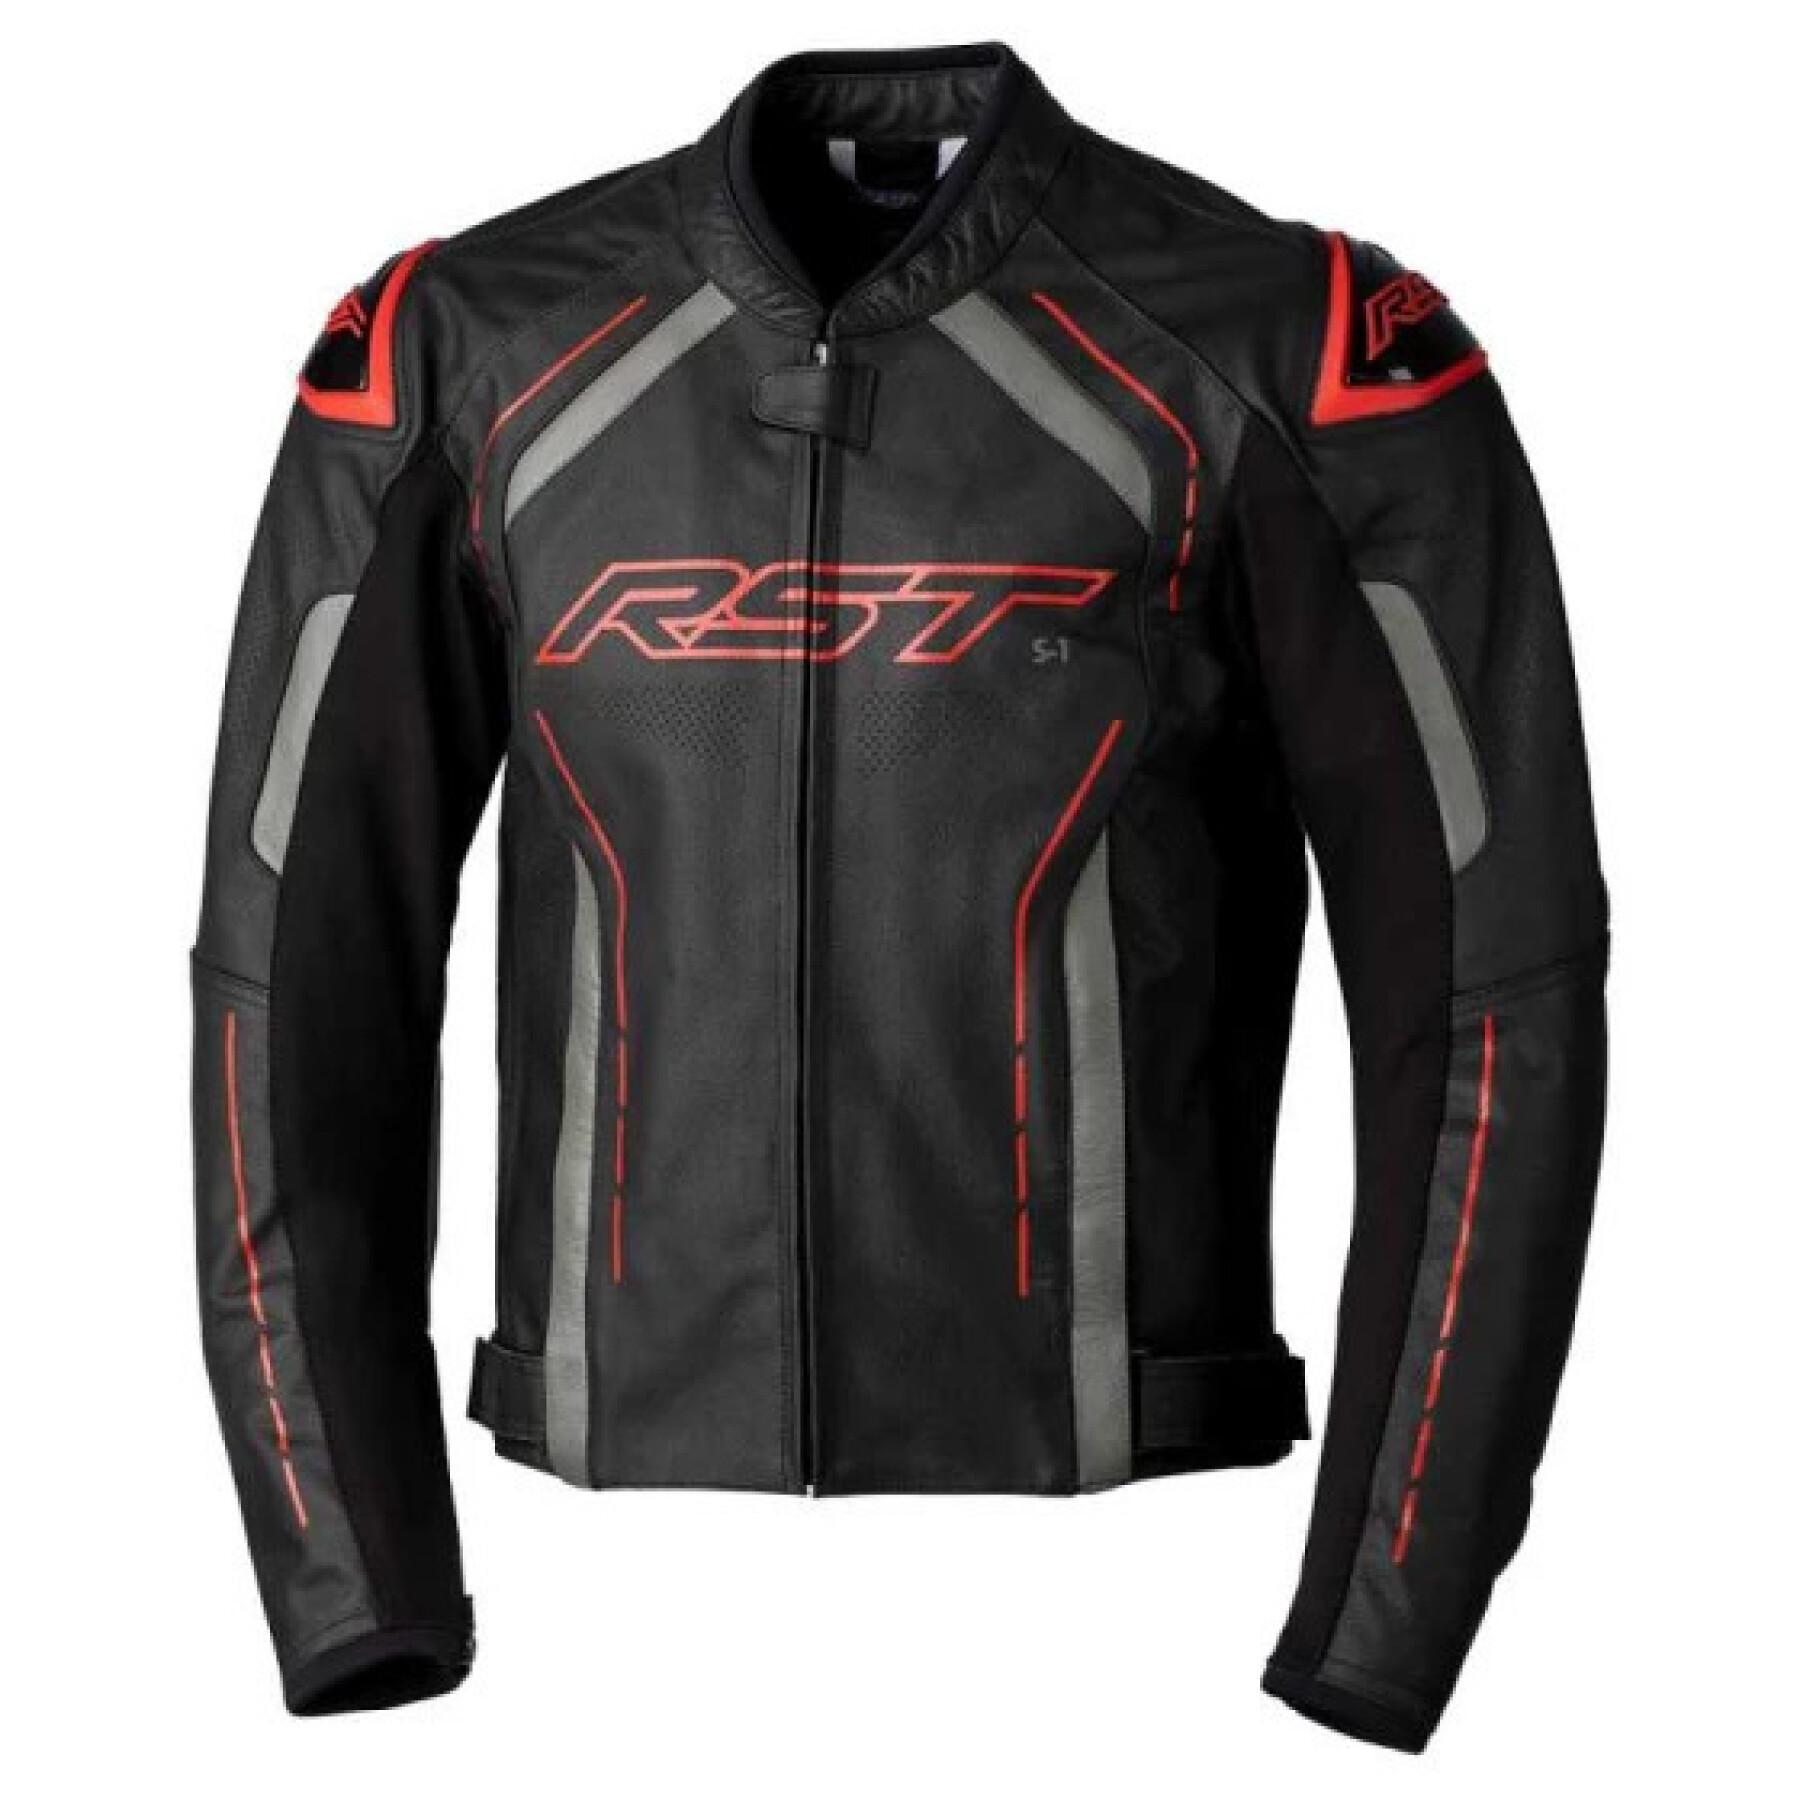 Motorcycle leather jacket RST S1 CE